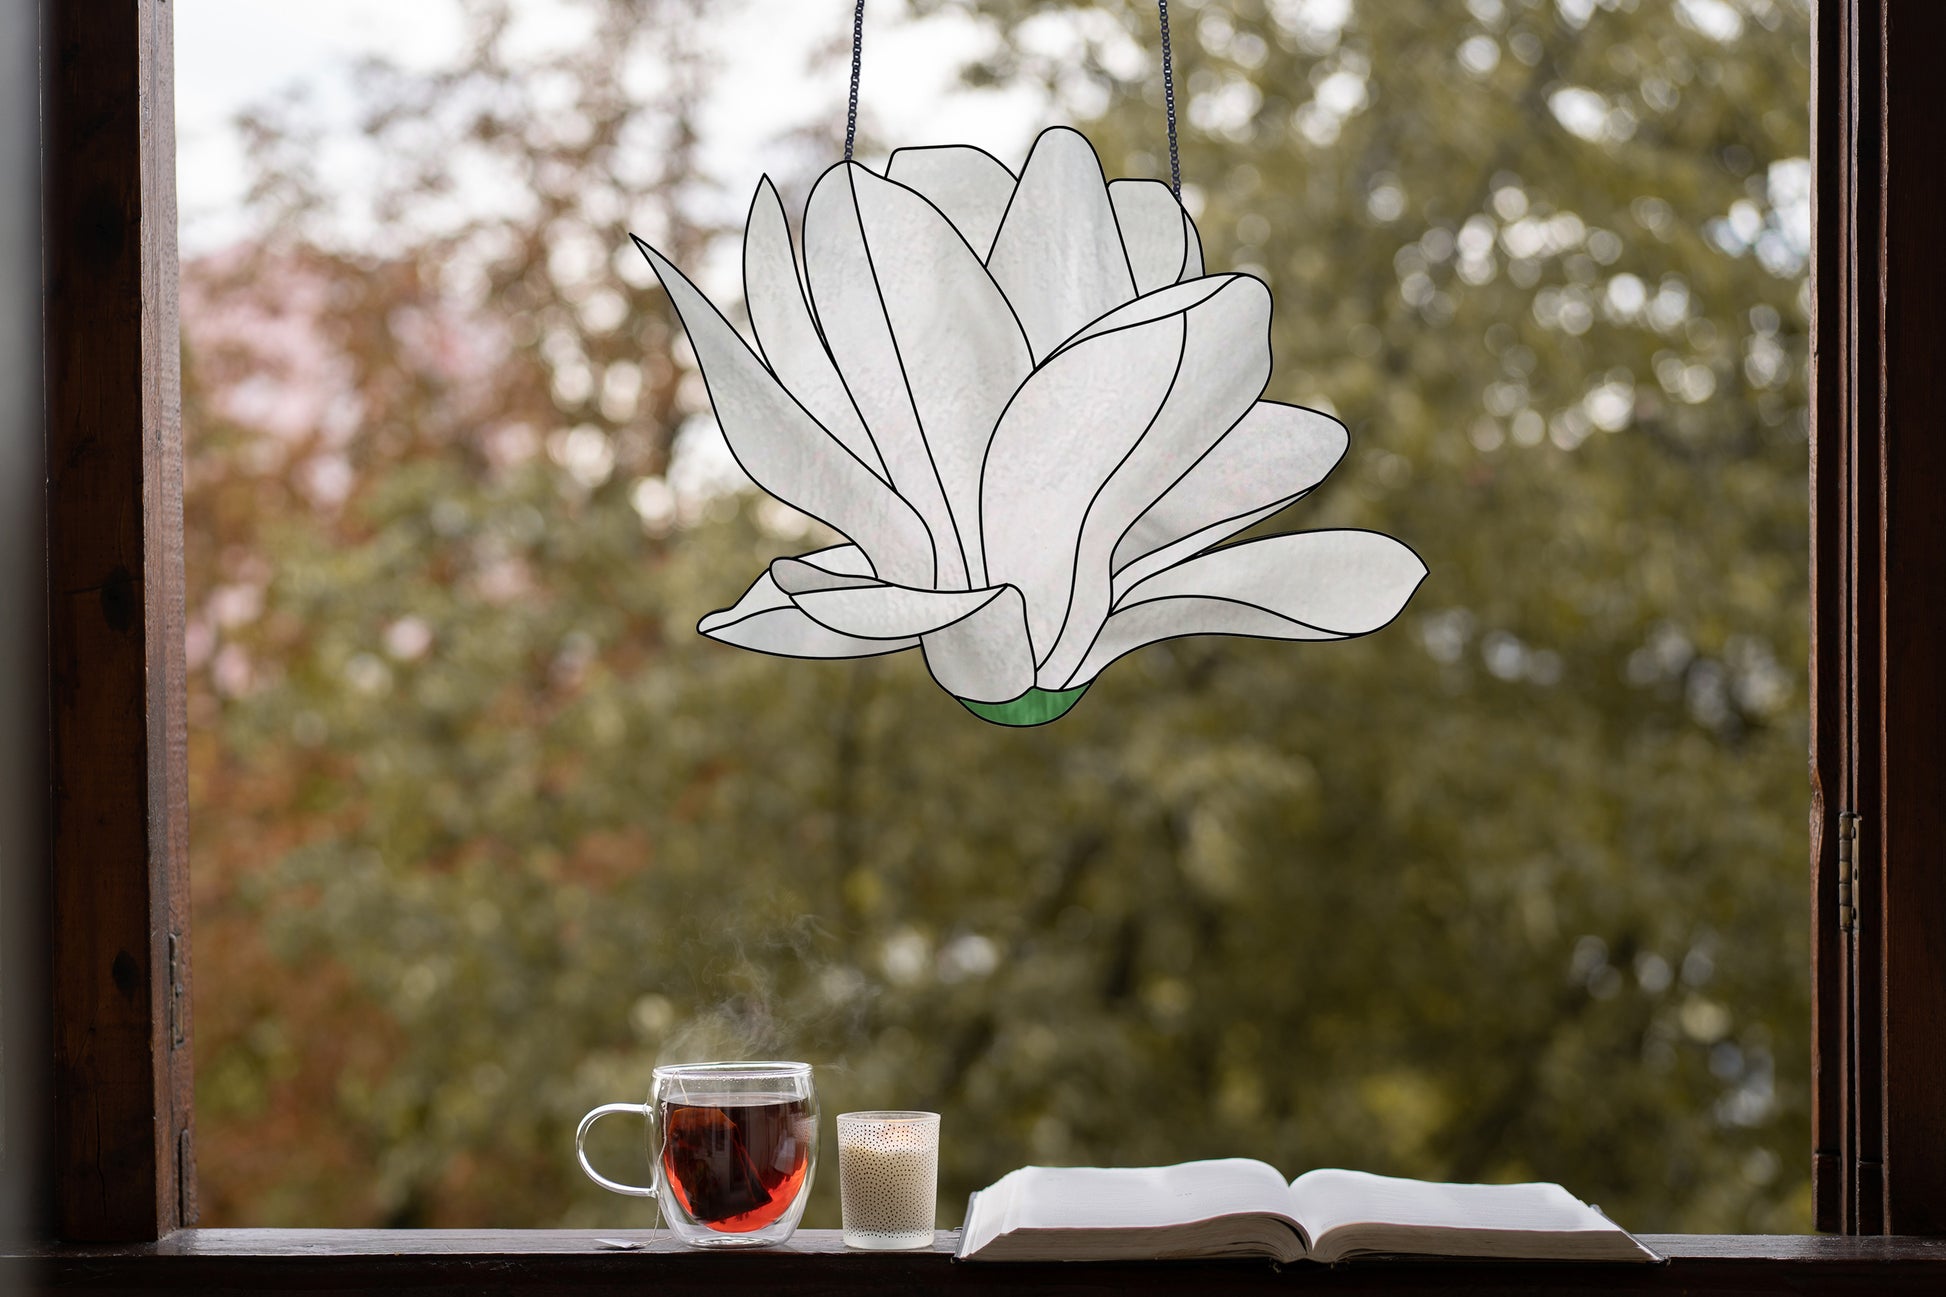 Stained glass pattern for a giant white snowdrop flower, instant PDF download, shown hanging in a window with a cup of tea and a book